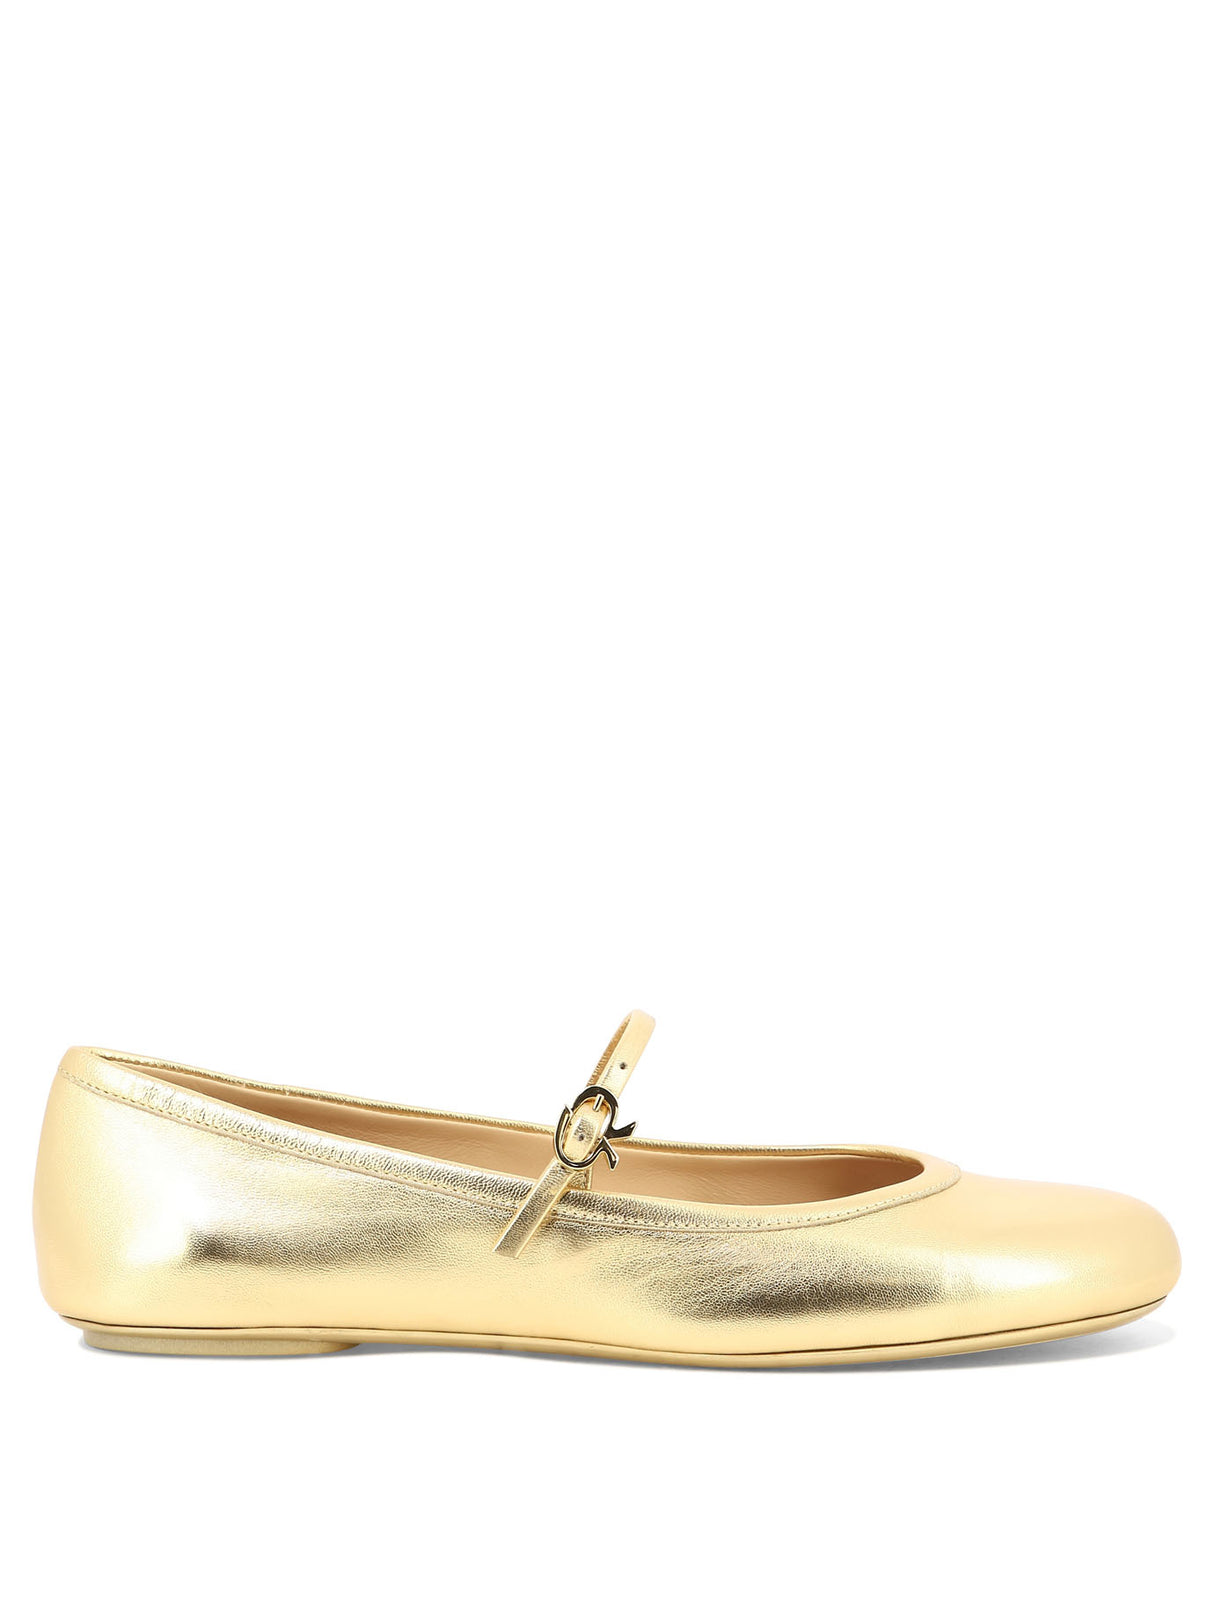 GIANVITO ROSSI Gold Ballet Flats for Women - Strappy Instep with Ribbon Buckle